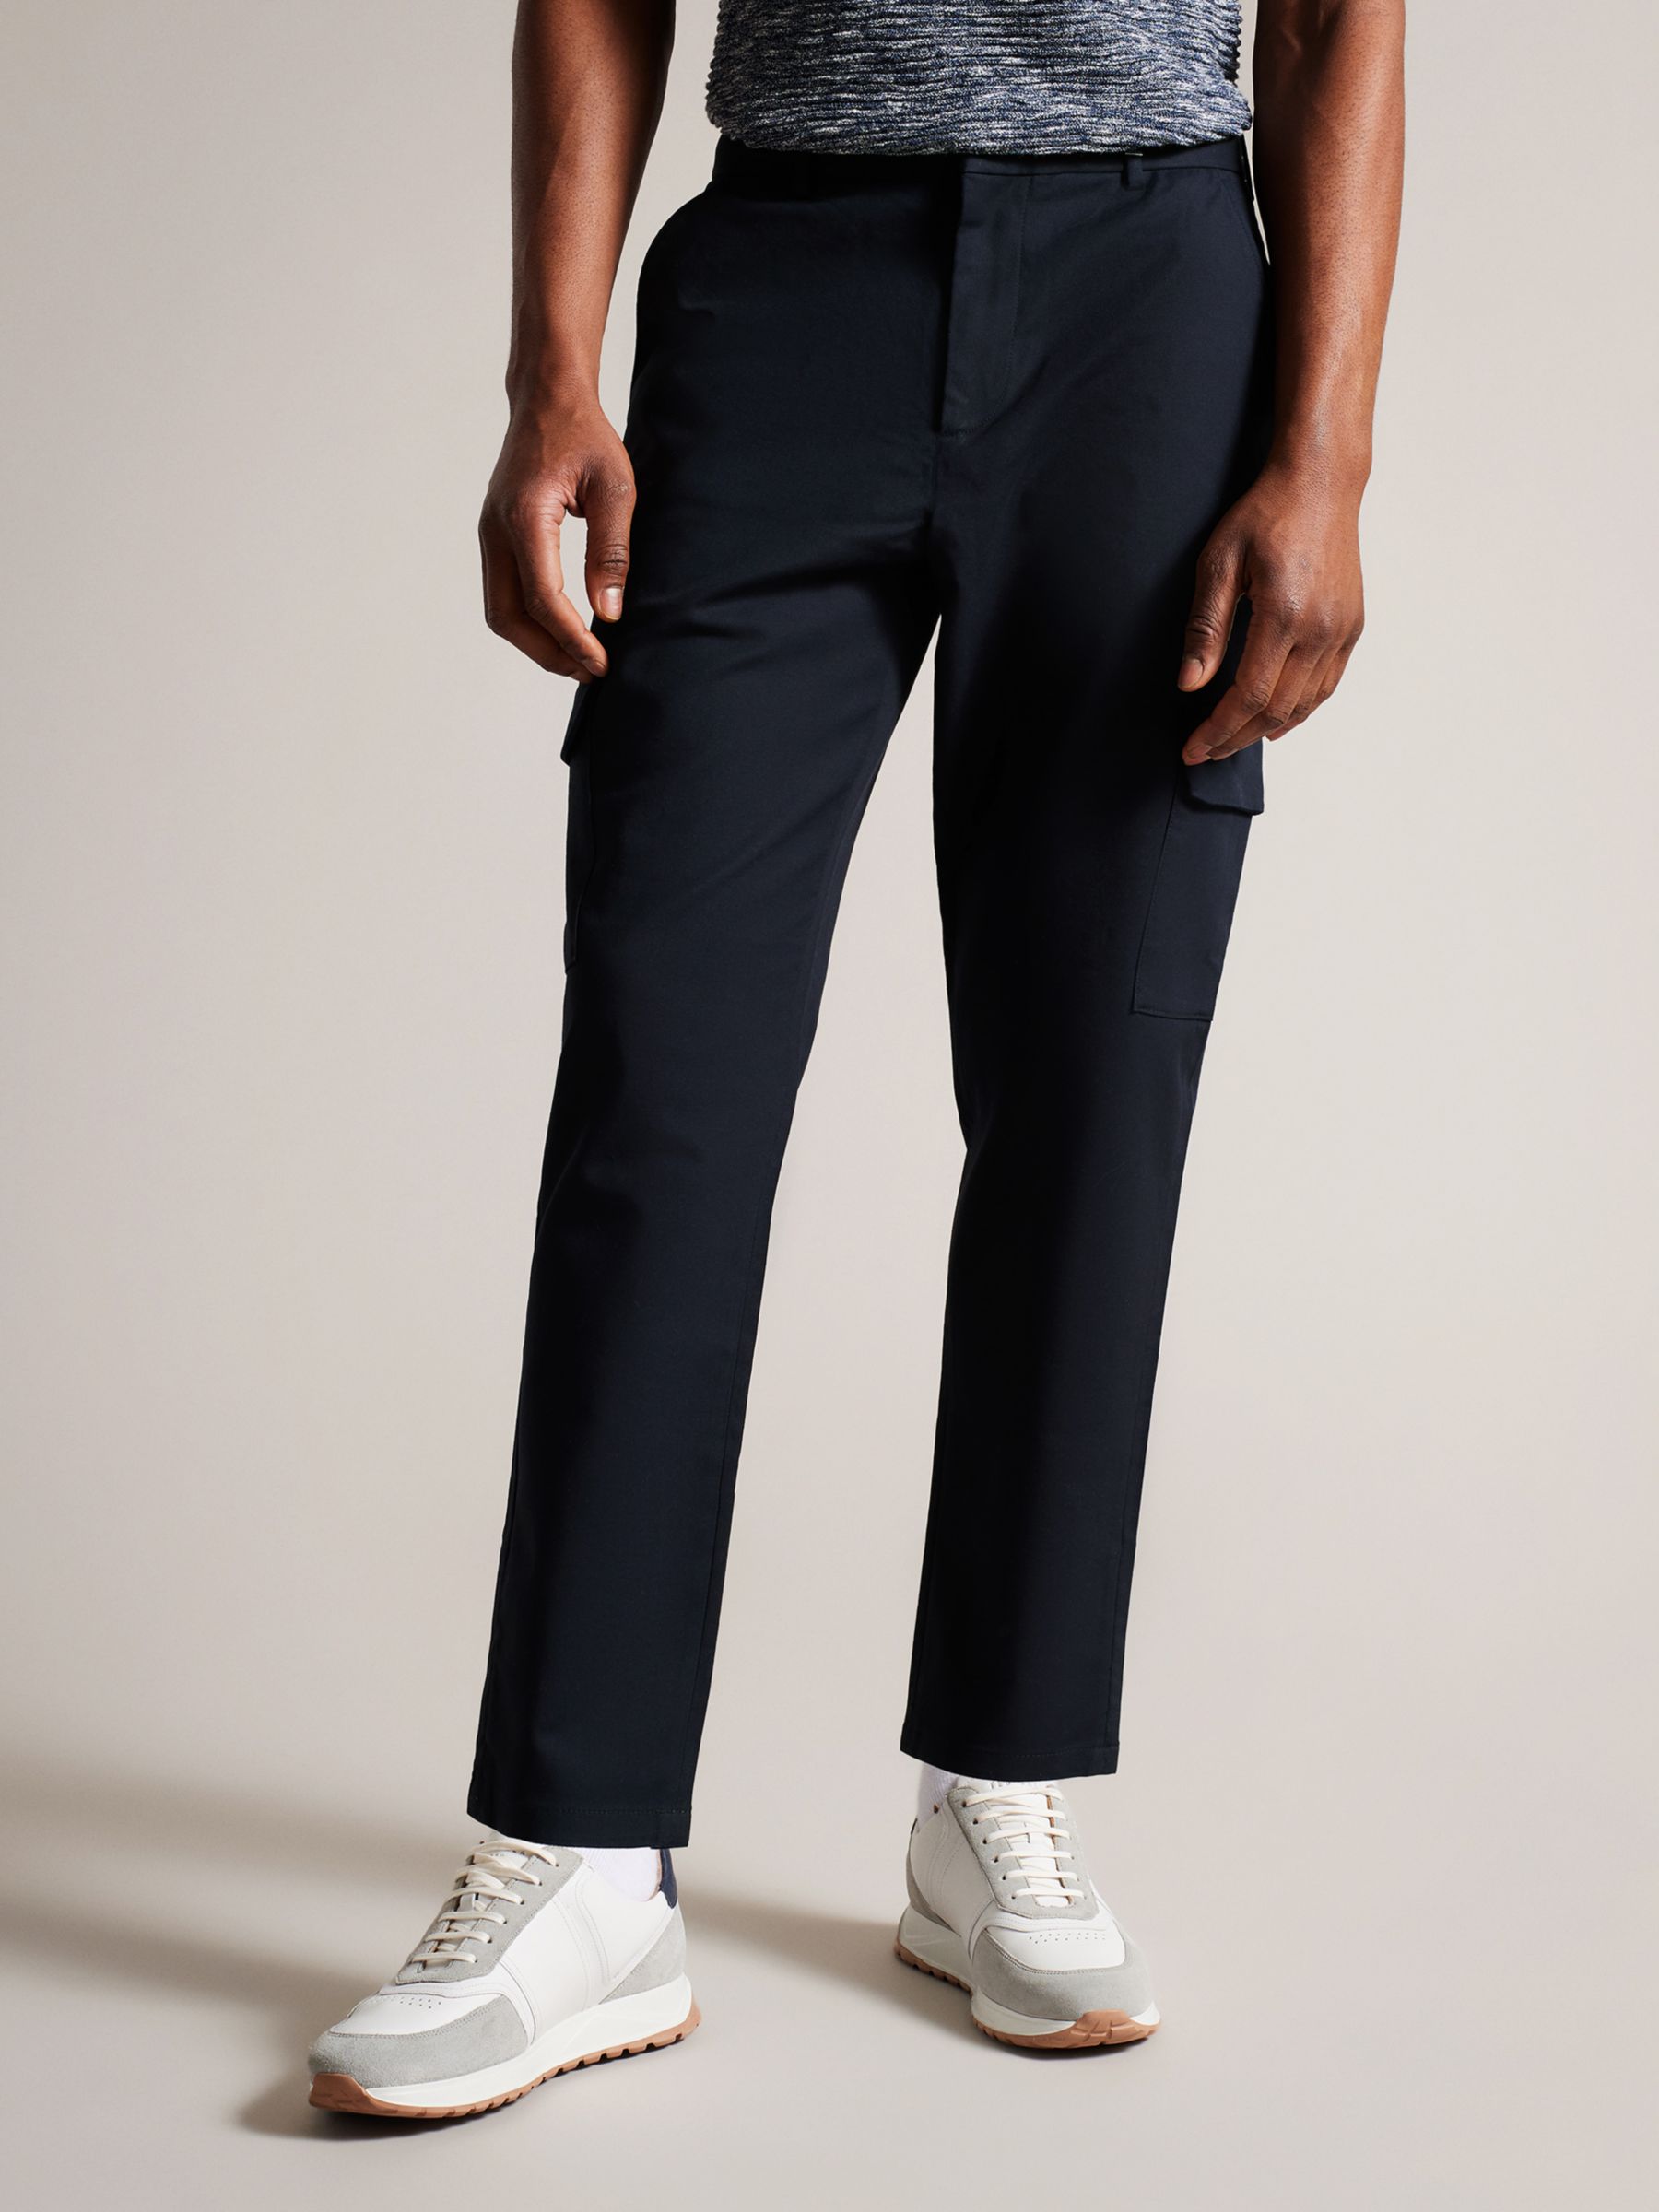 Ted Baker Irvine Slim Fit Cargo Trousers, Navy at John Lewis & Partners